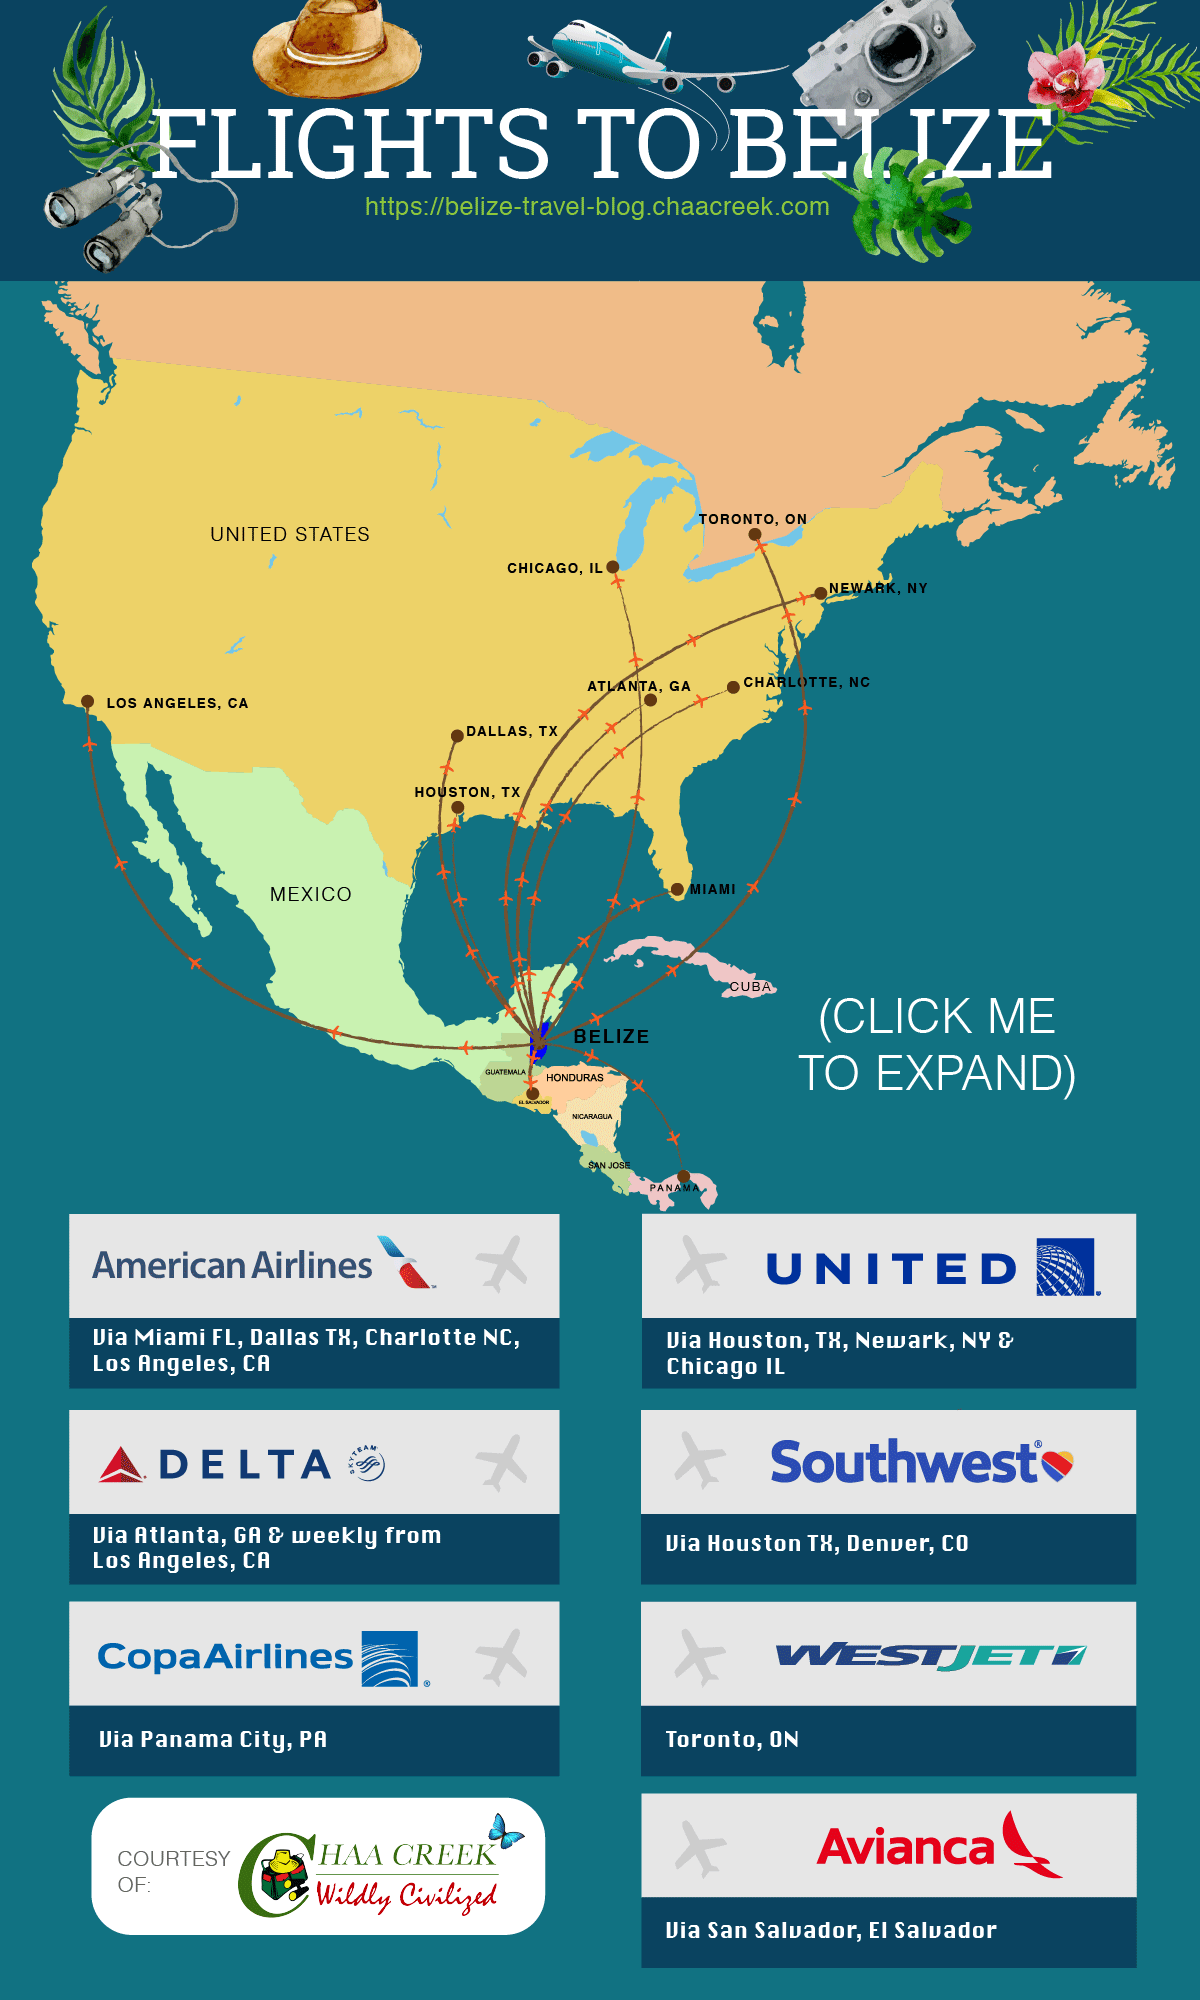 flights_to_belize_infographic_schedule_travel_guide_chaa_creek_expand